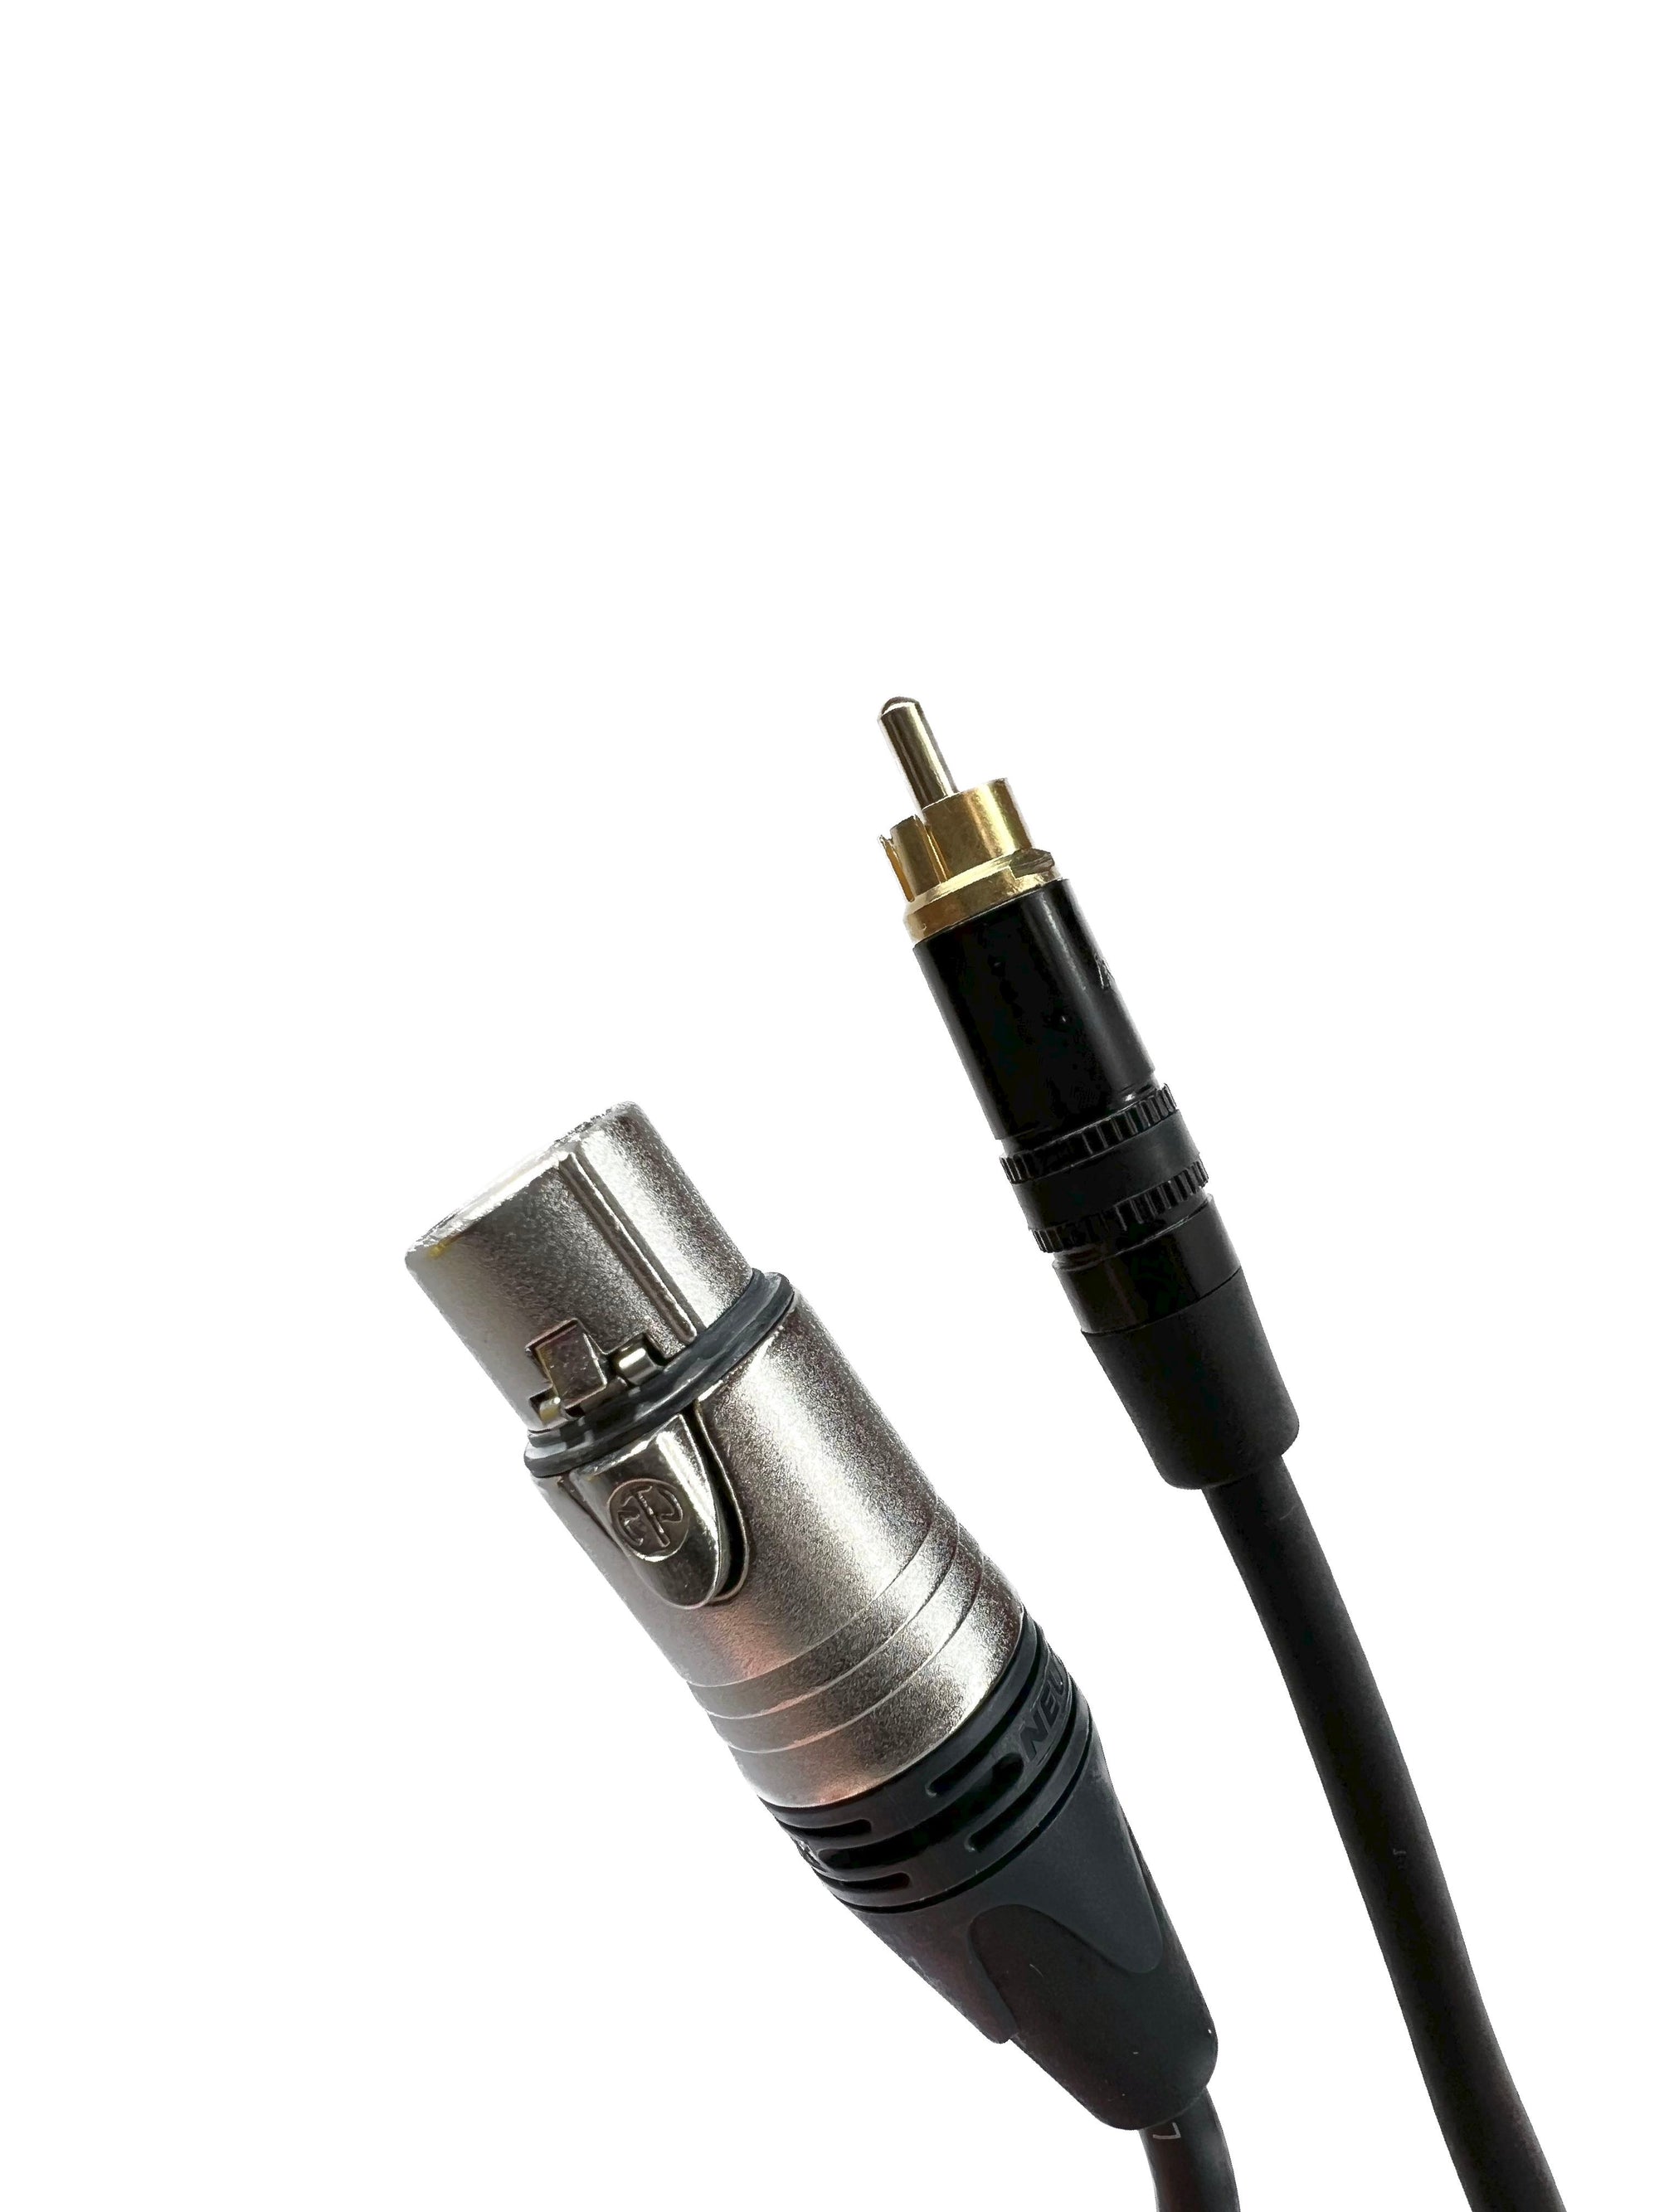 XLR Female Two RCA Male Plugs 1 FT at Cables N More